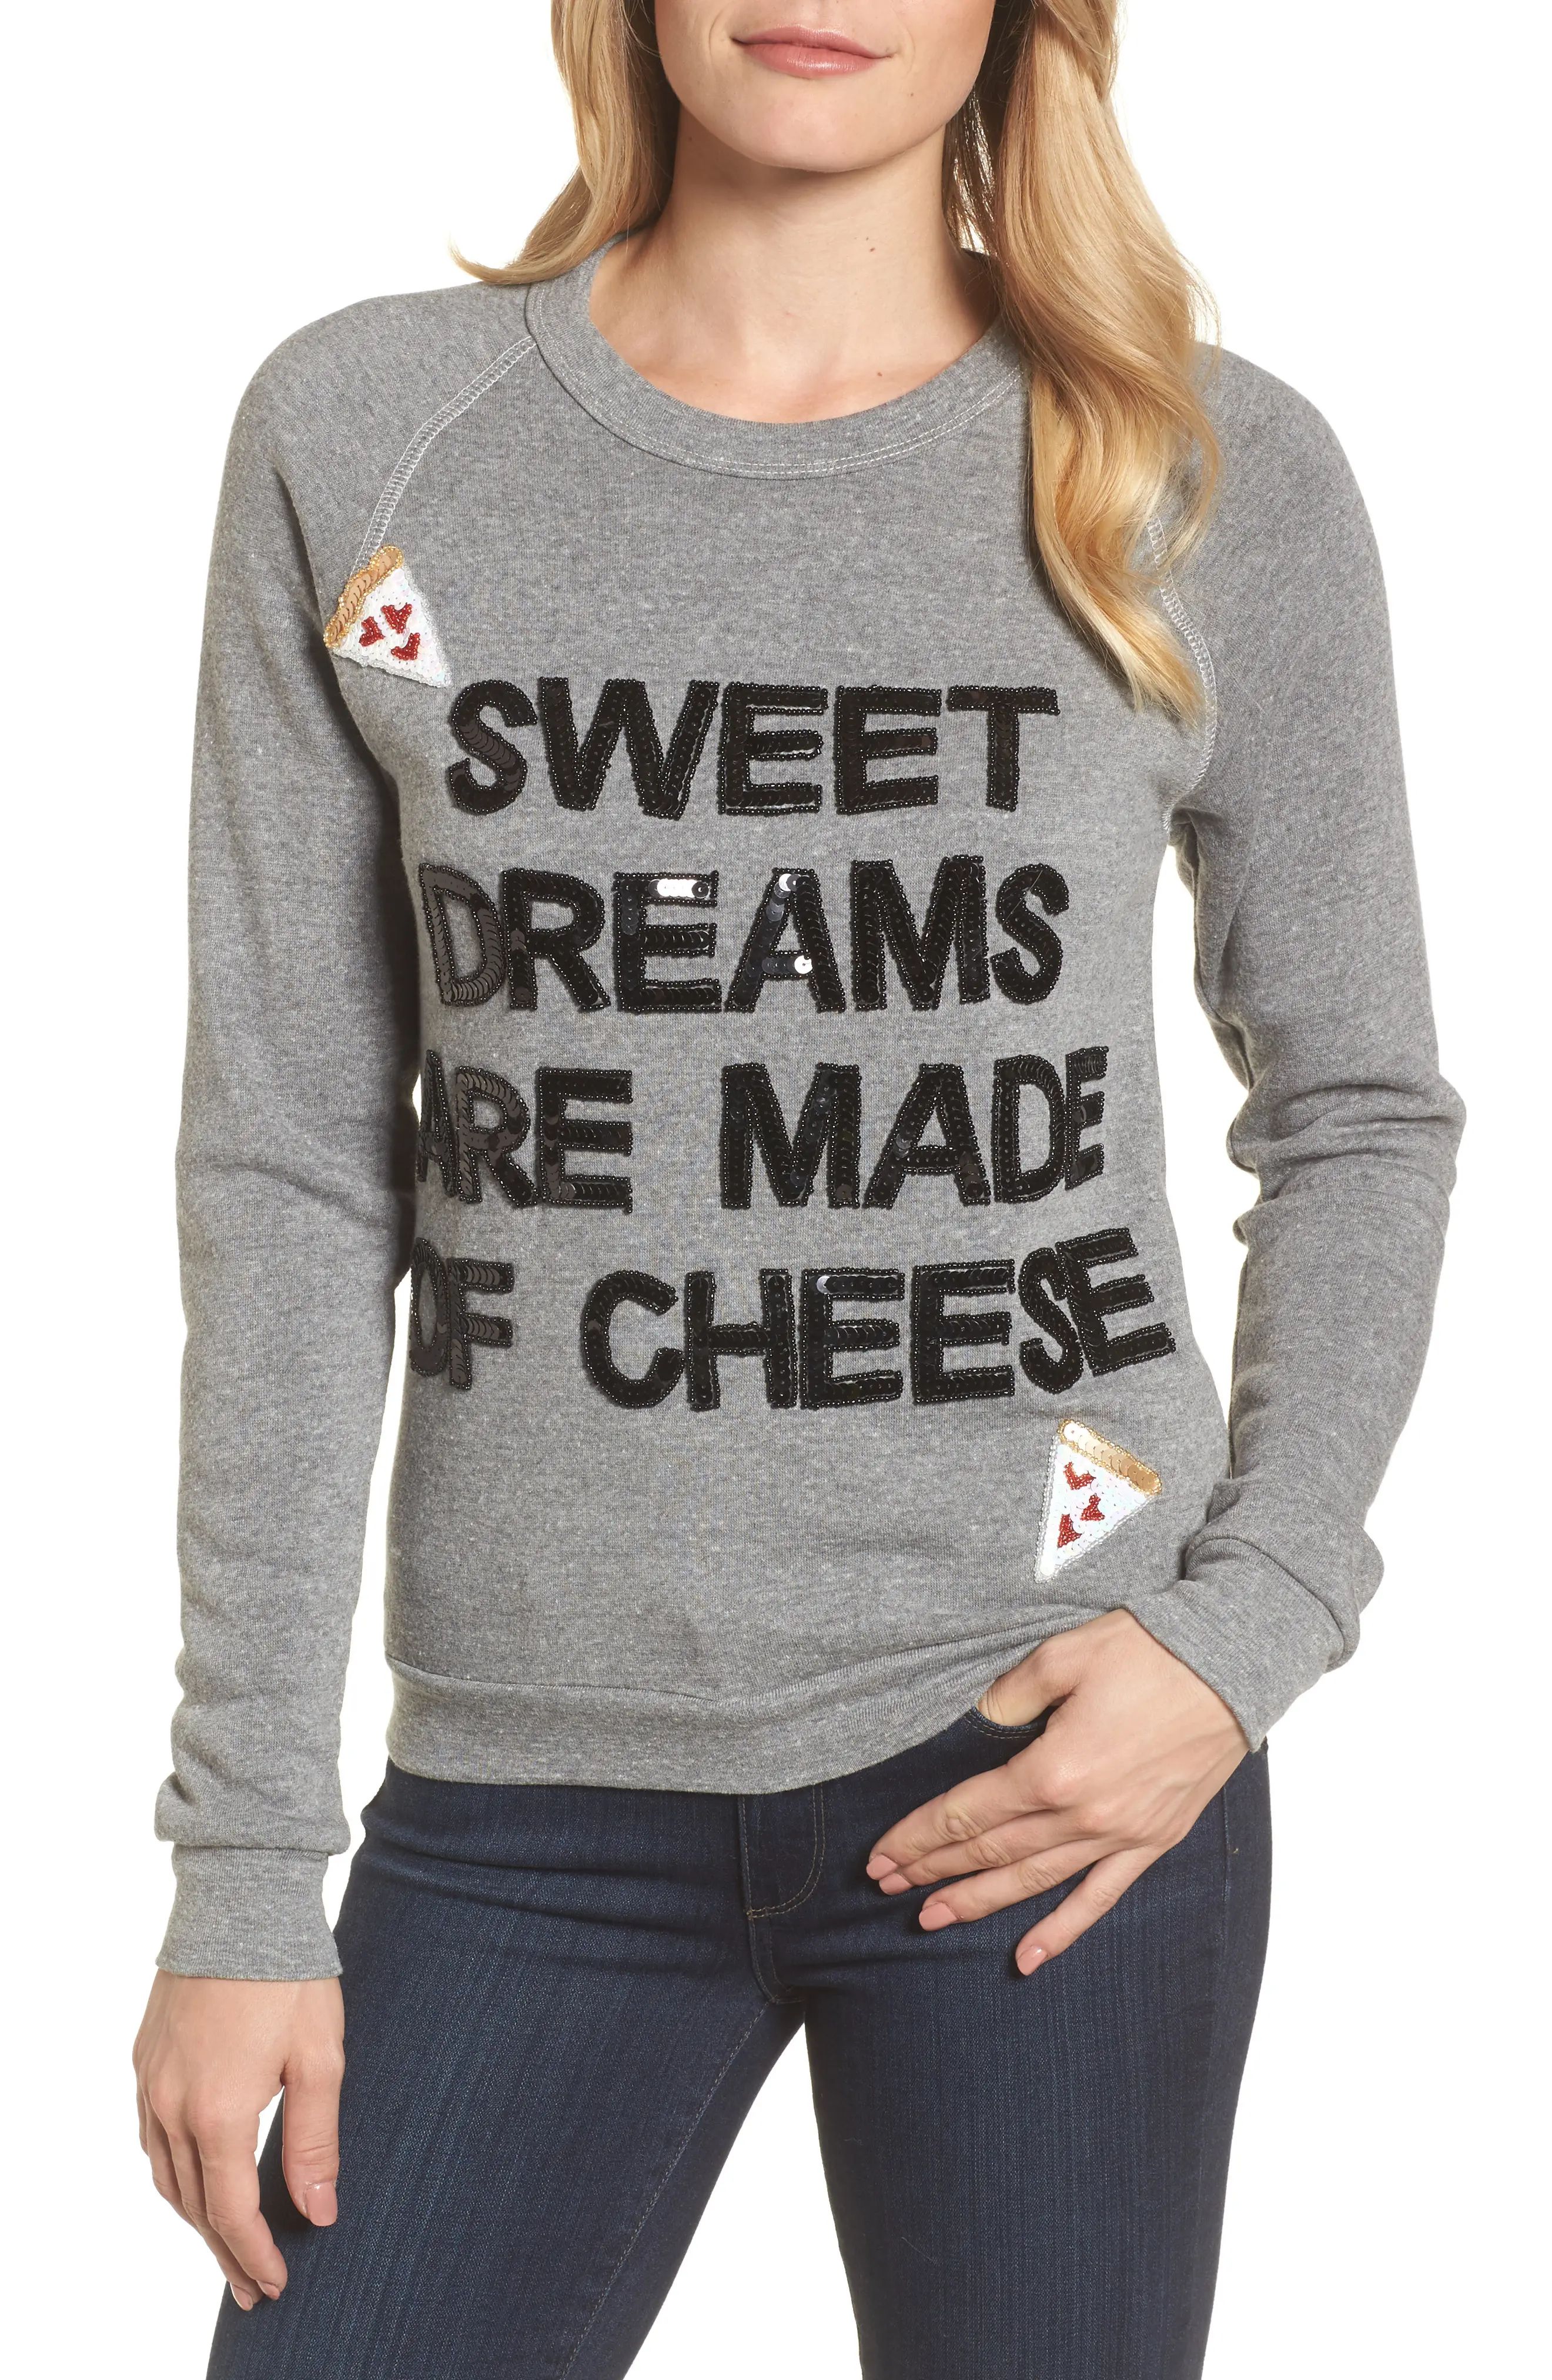 Sweet Dreams are Made of Cheese Sweatshirt | Nordstrom